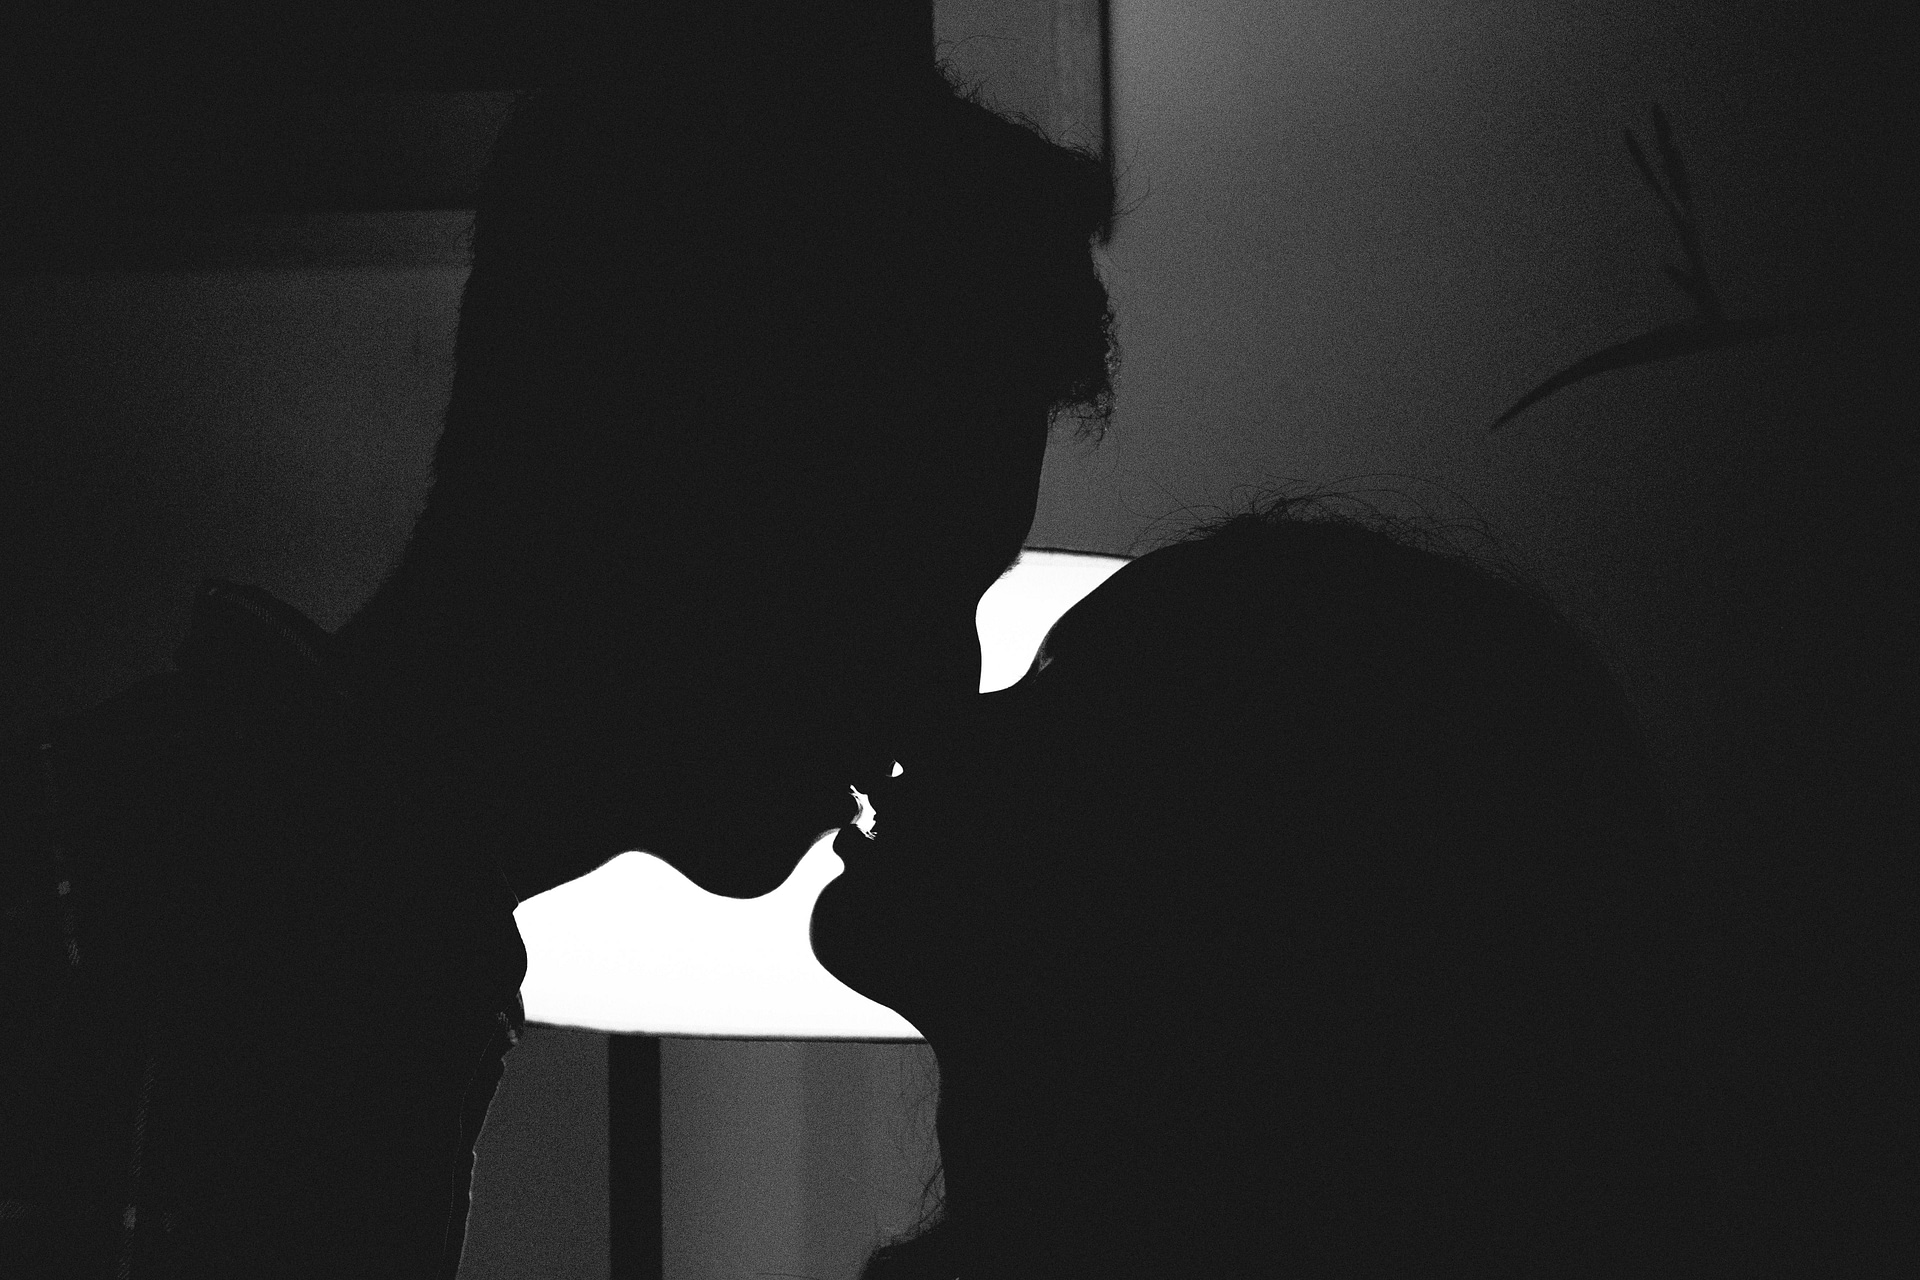 Image of Two people kissing showing Intamacy in relationships